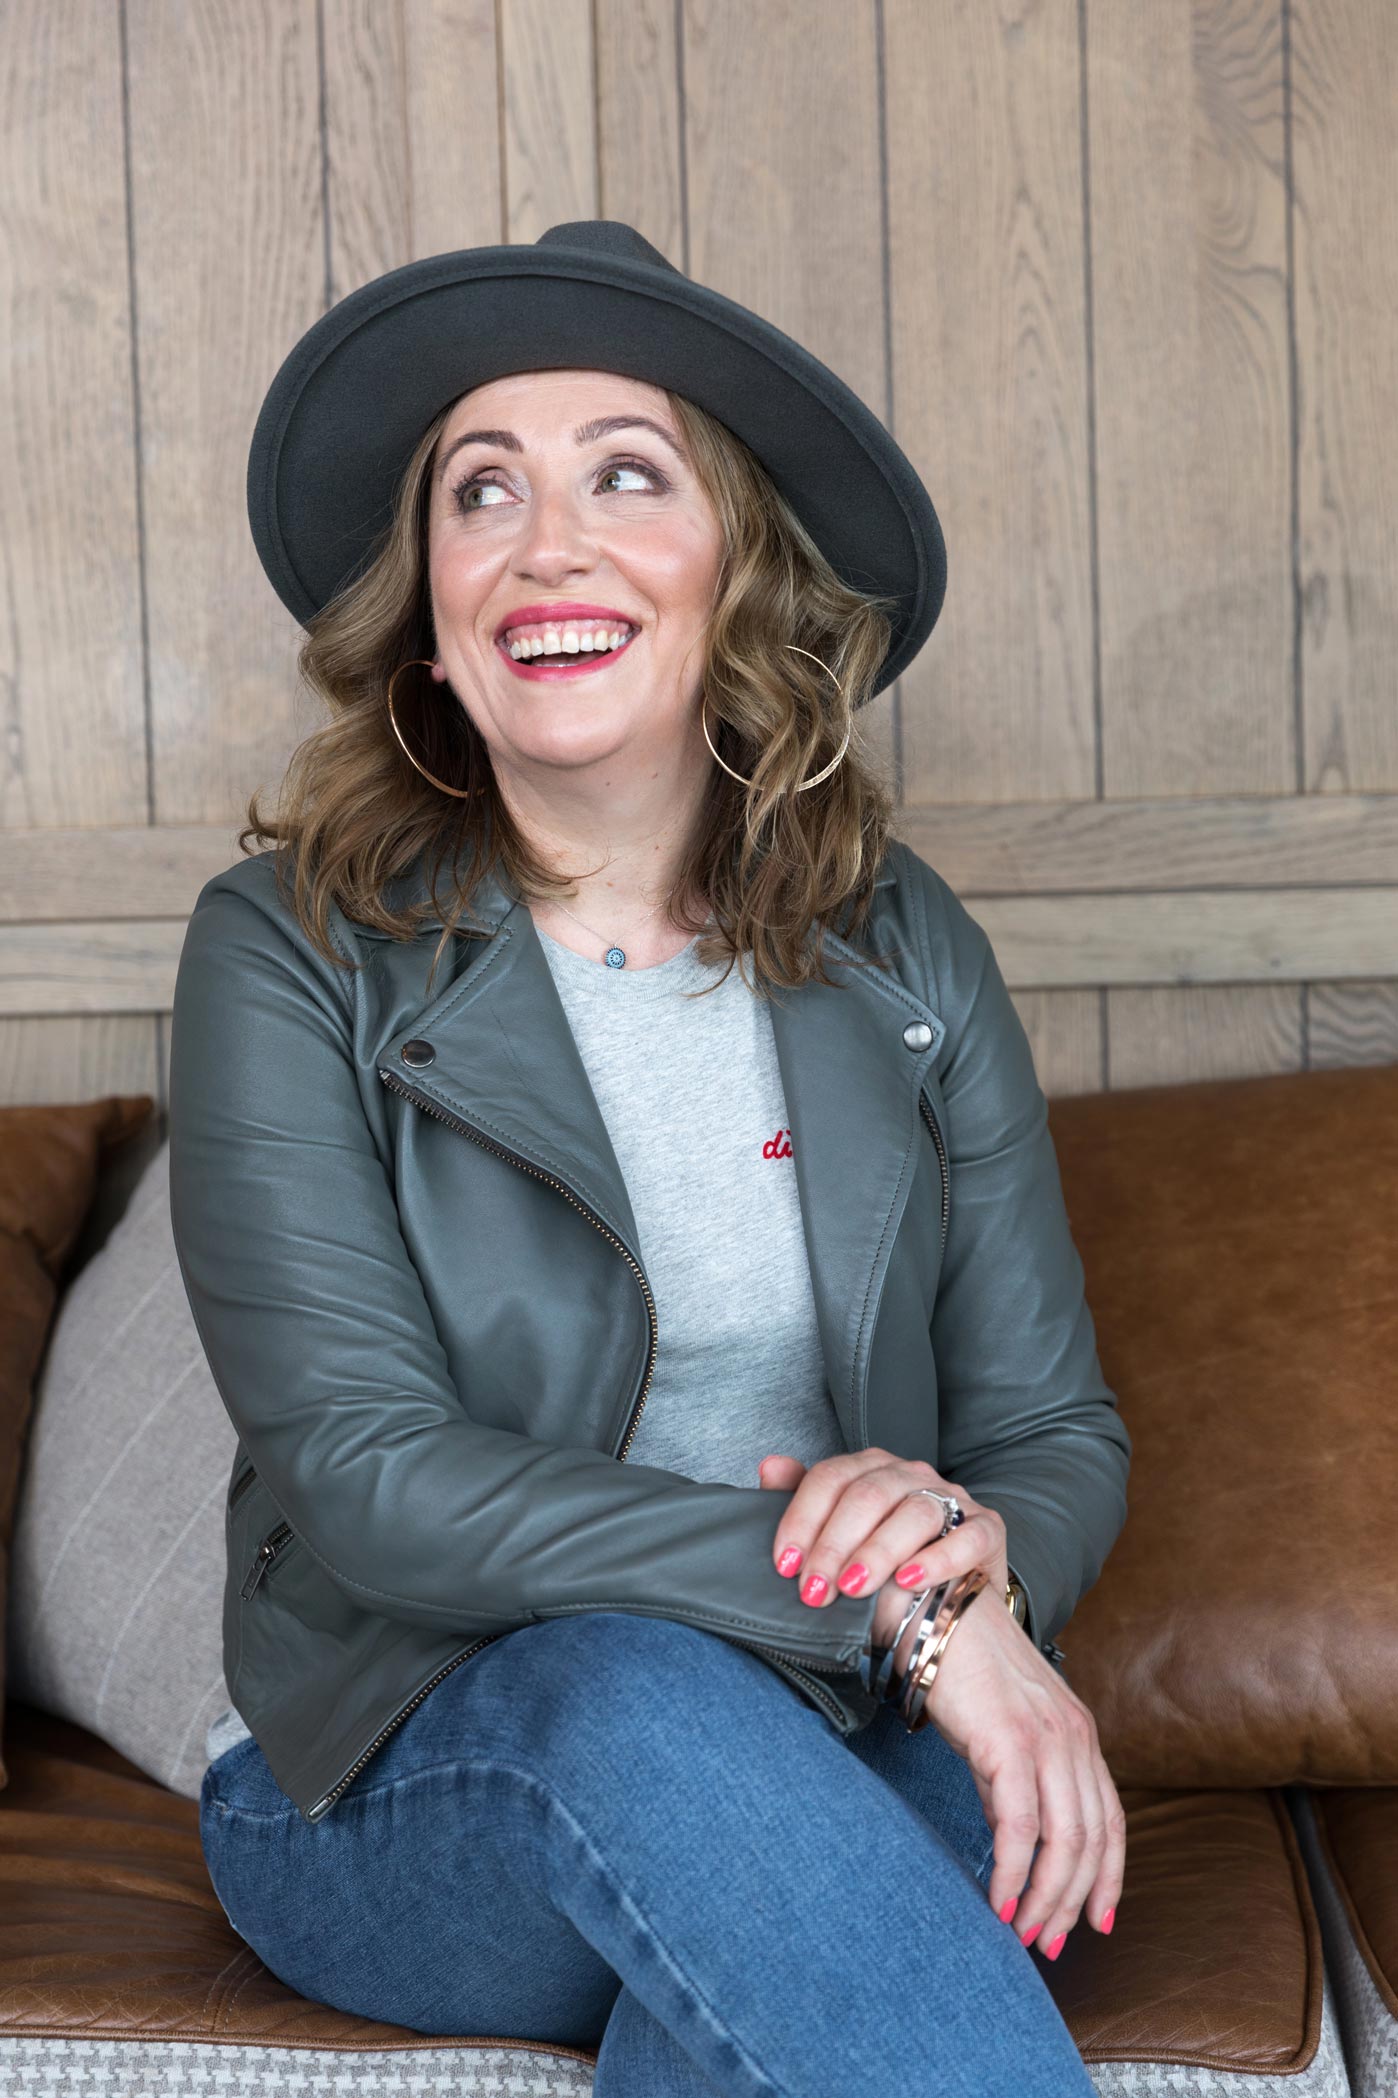 A woman in a hat laughs at a personal branding photoshoot in London